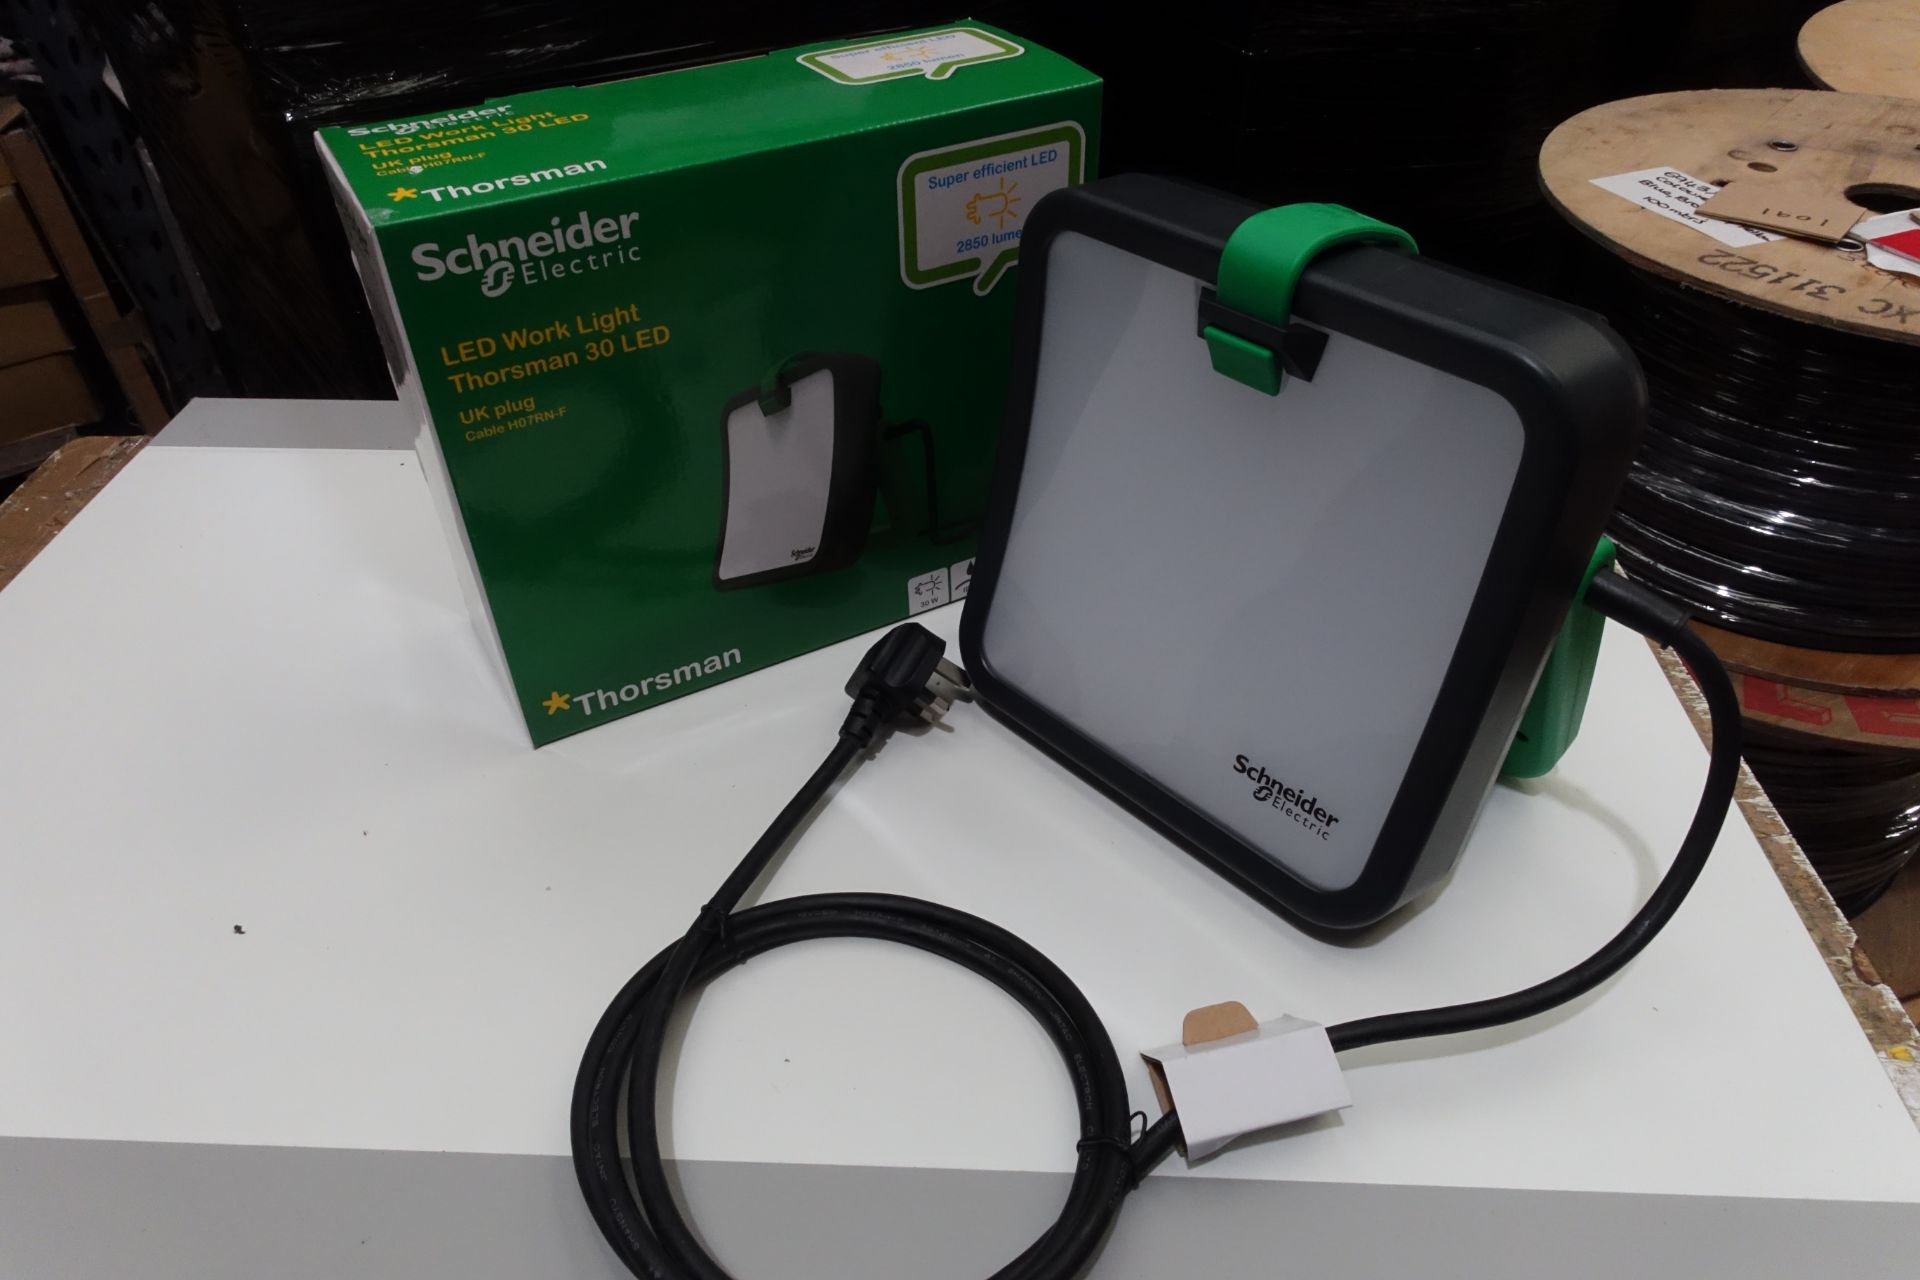 4 x SCHNEIDER IMT33104 30W 240V IP65 LED Work Light with 13A Socket on the back 2Mtrs Cable